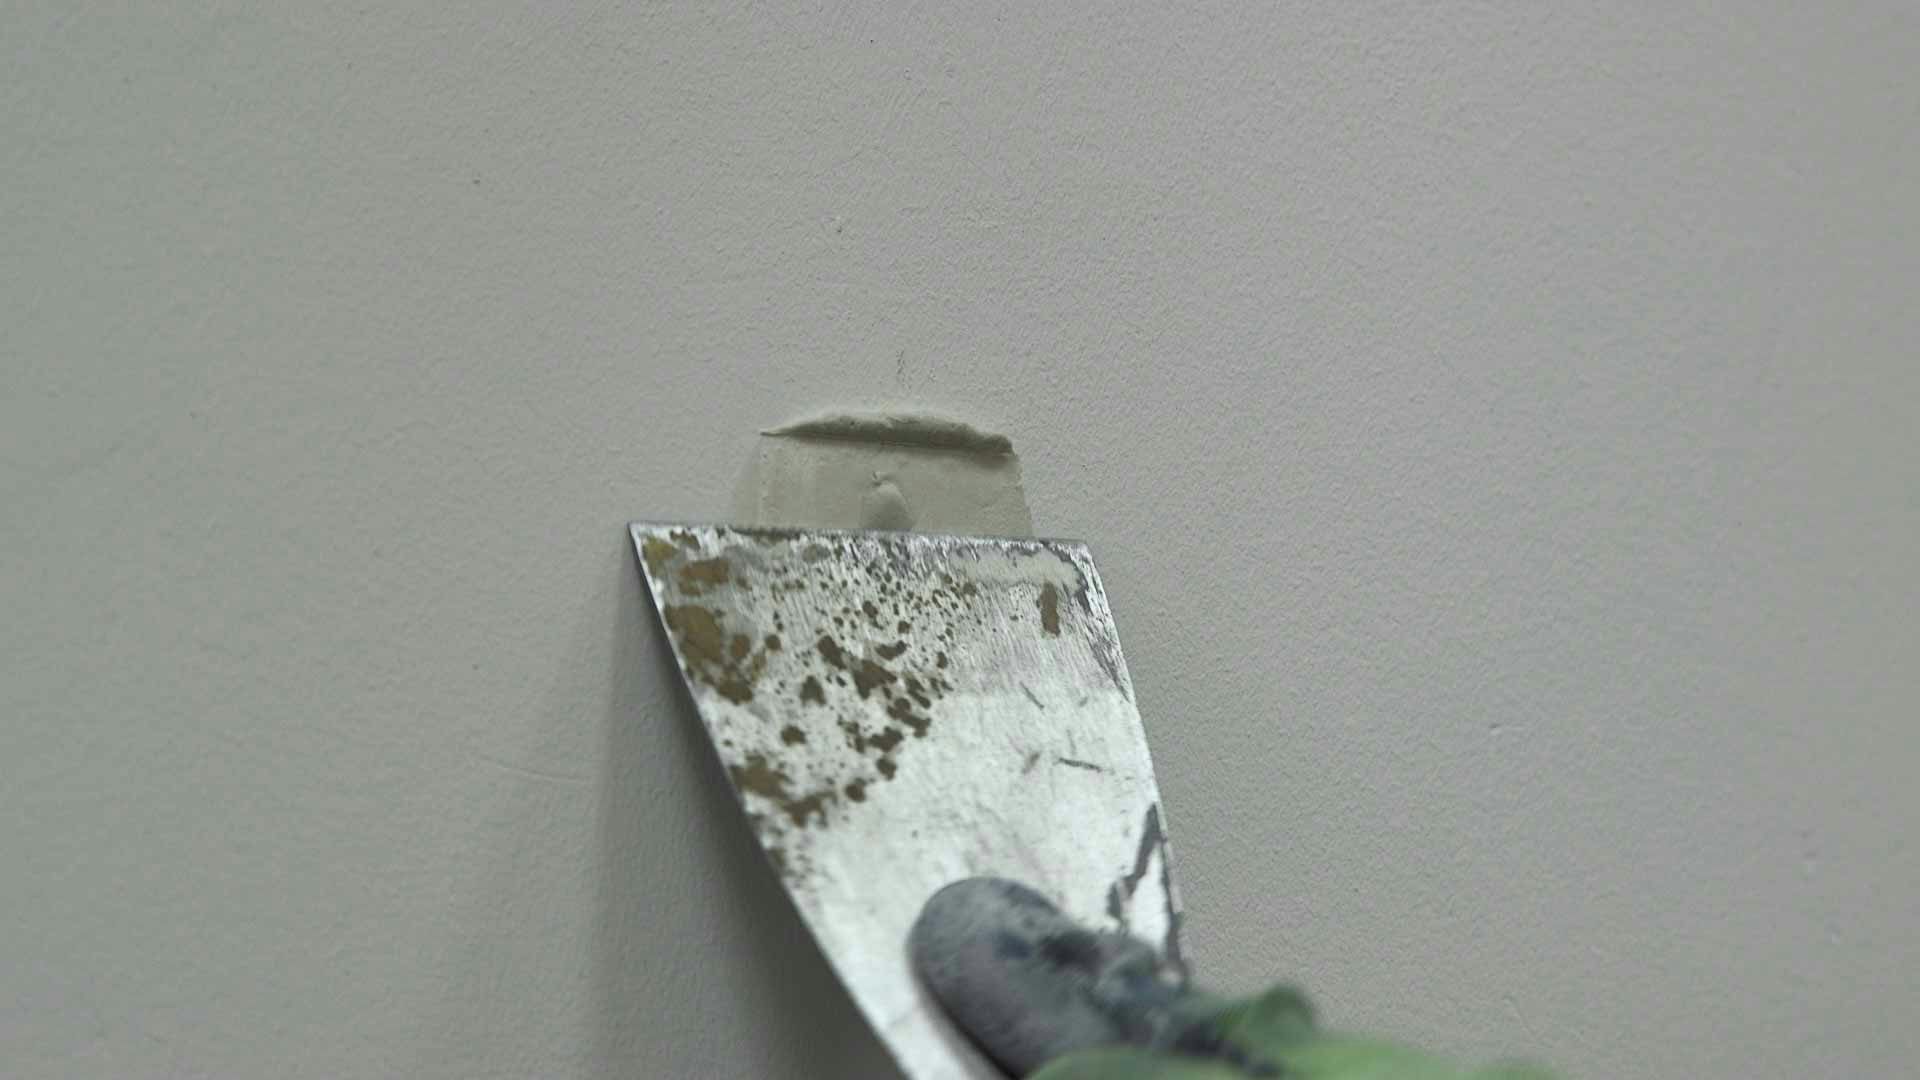 Applying filler to the crack or hole